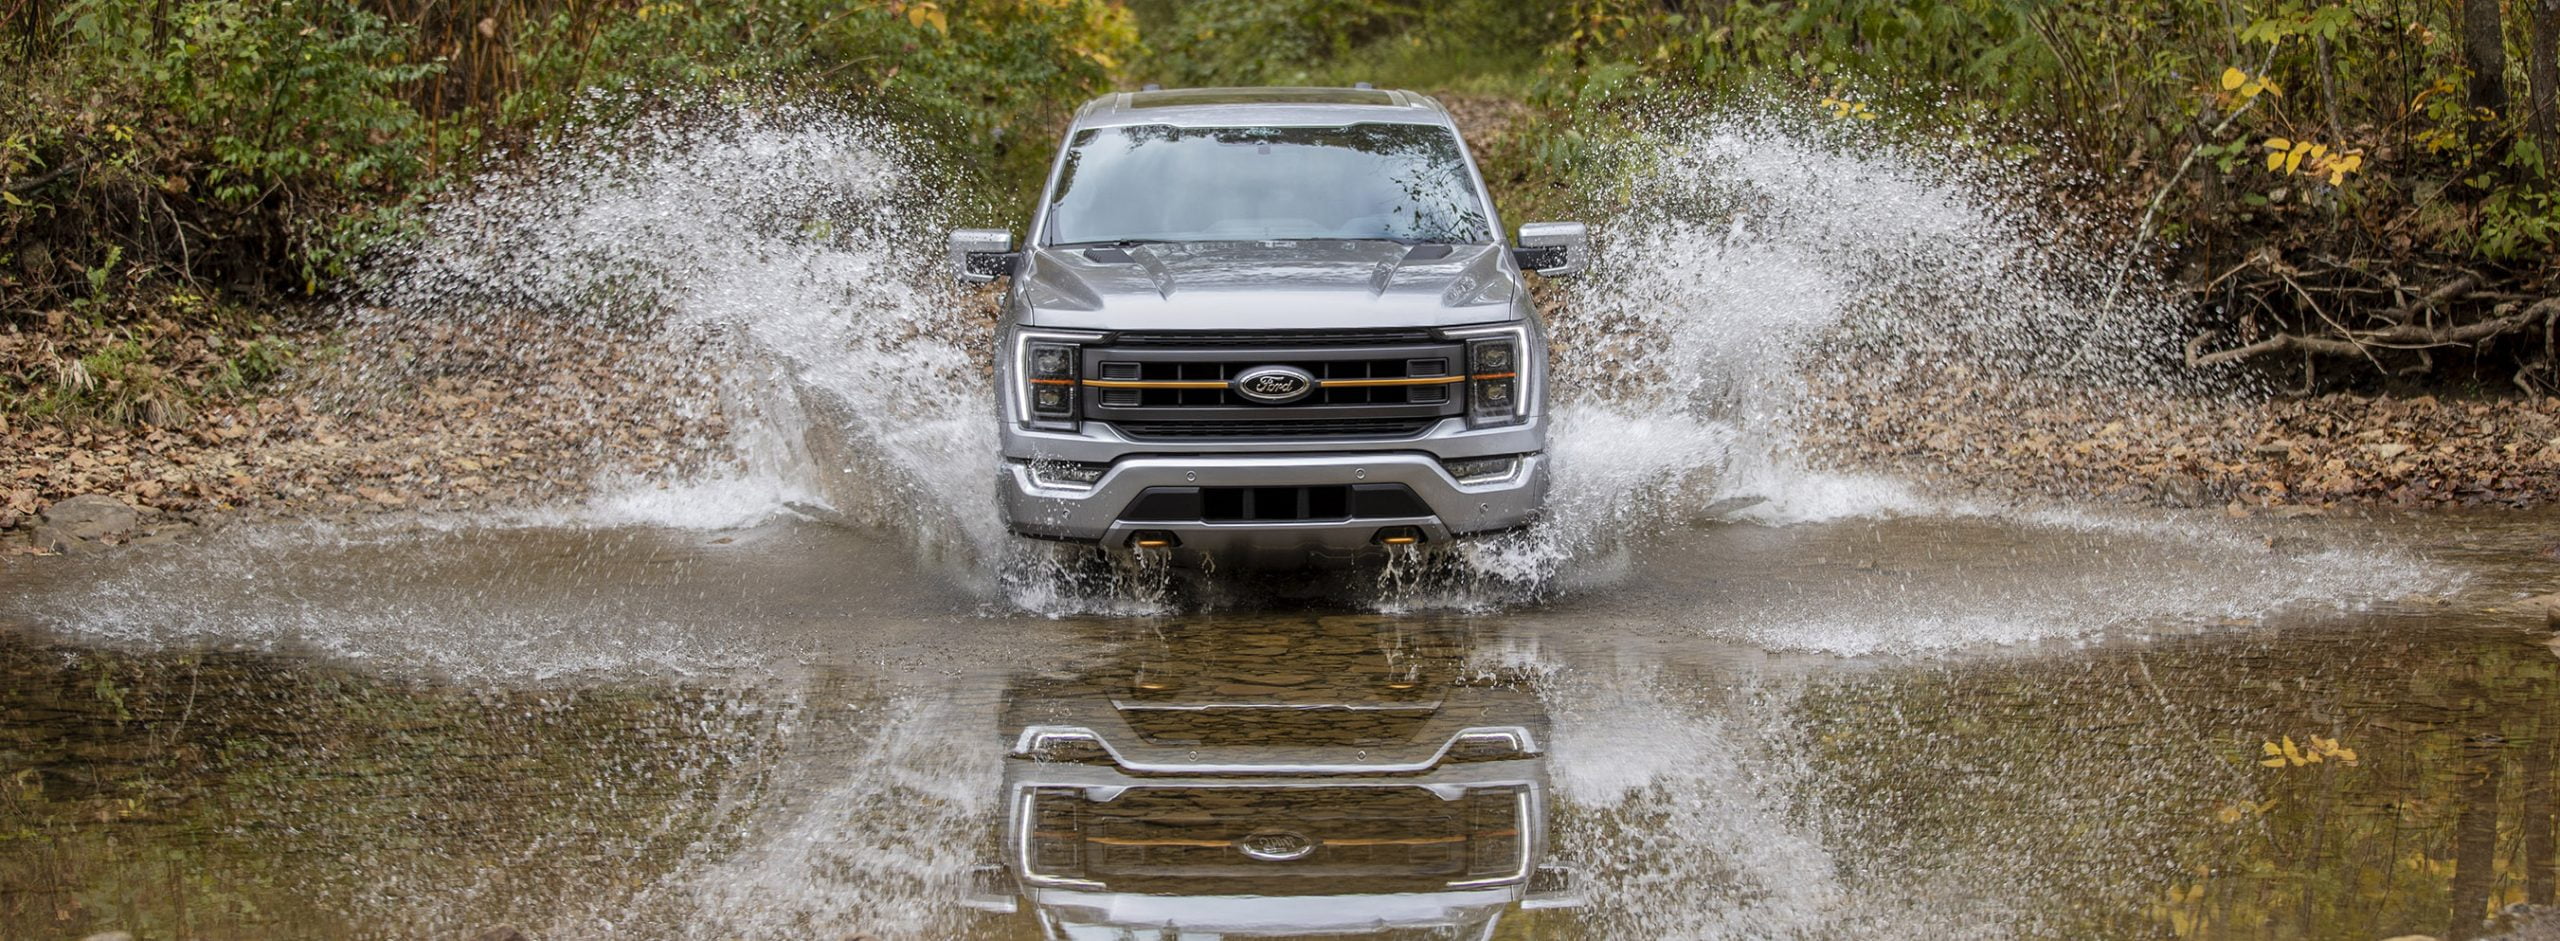 A 2021 Ford F-150 Tremor driving, head-on, through shallow water towards the viewer.